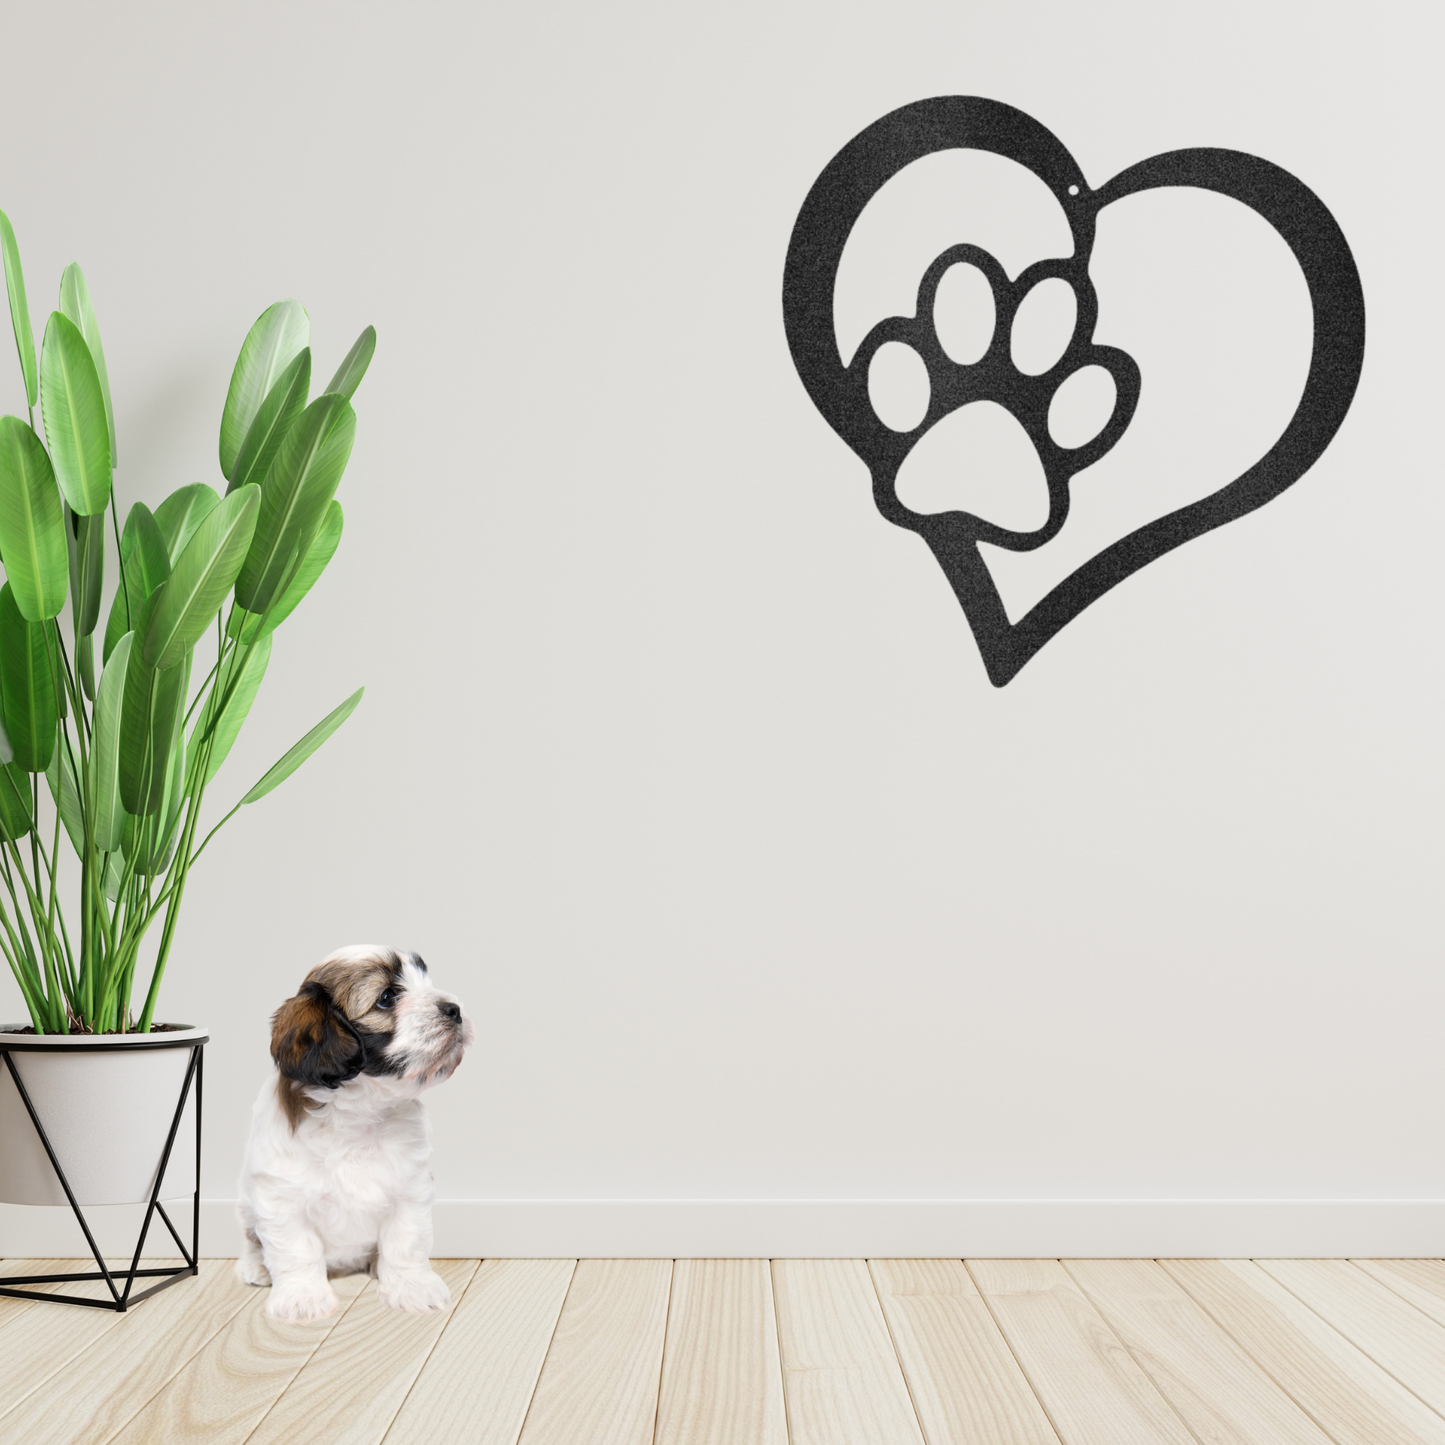 Puppy Love Metal Wall Art Puppy lovers home decor wall steel art dog pet parents pet moms and dads self indulgence pet passion